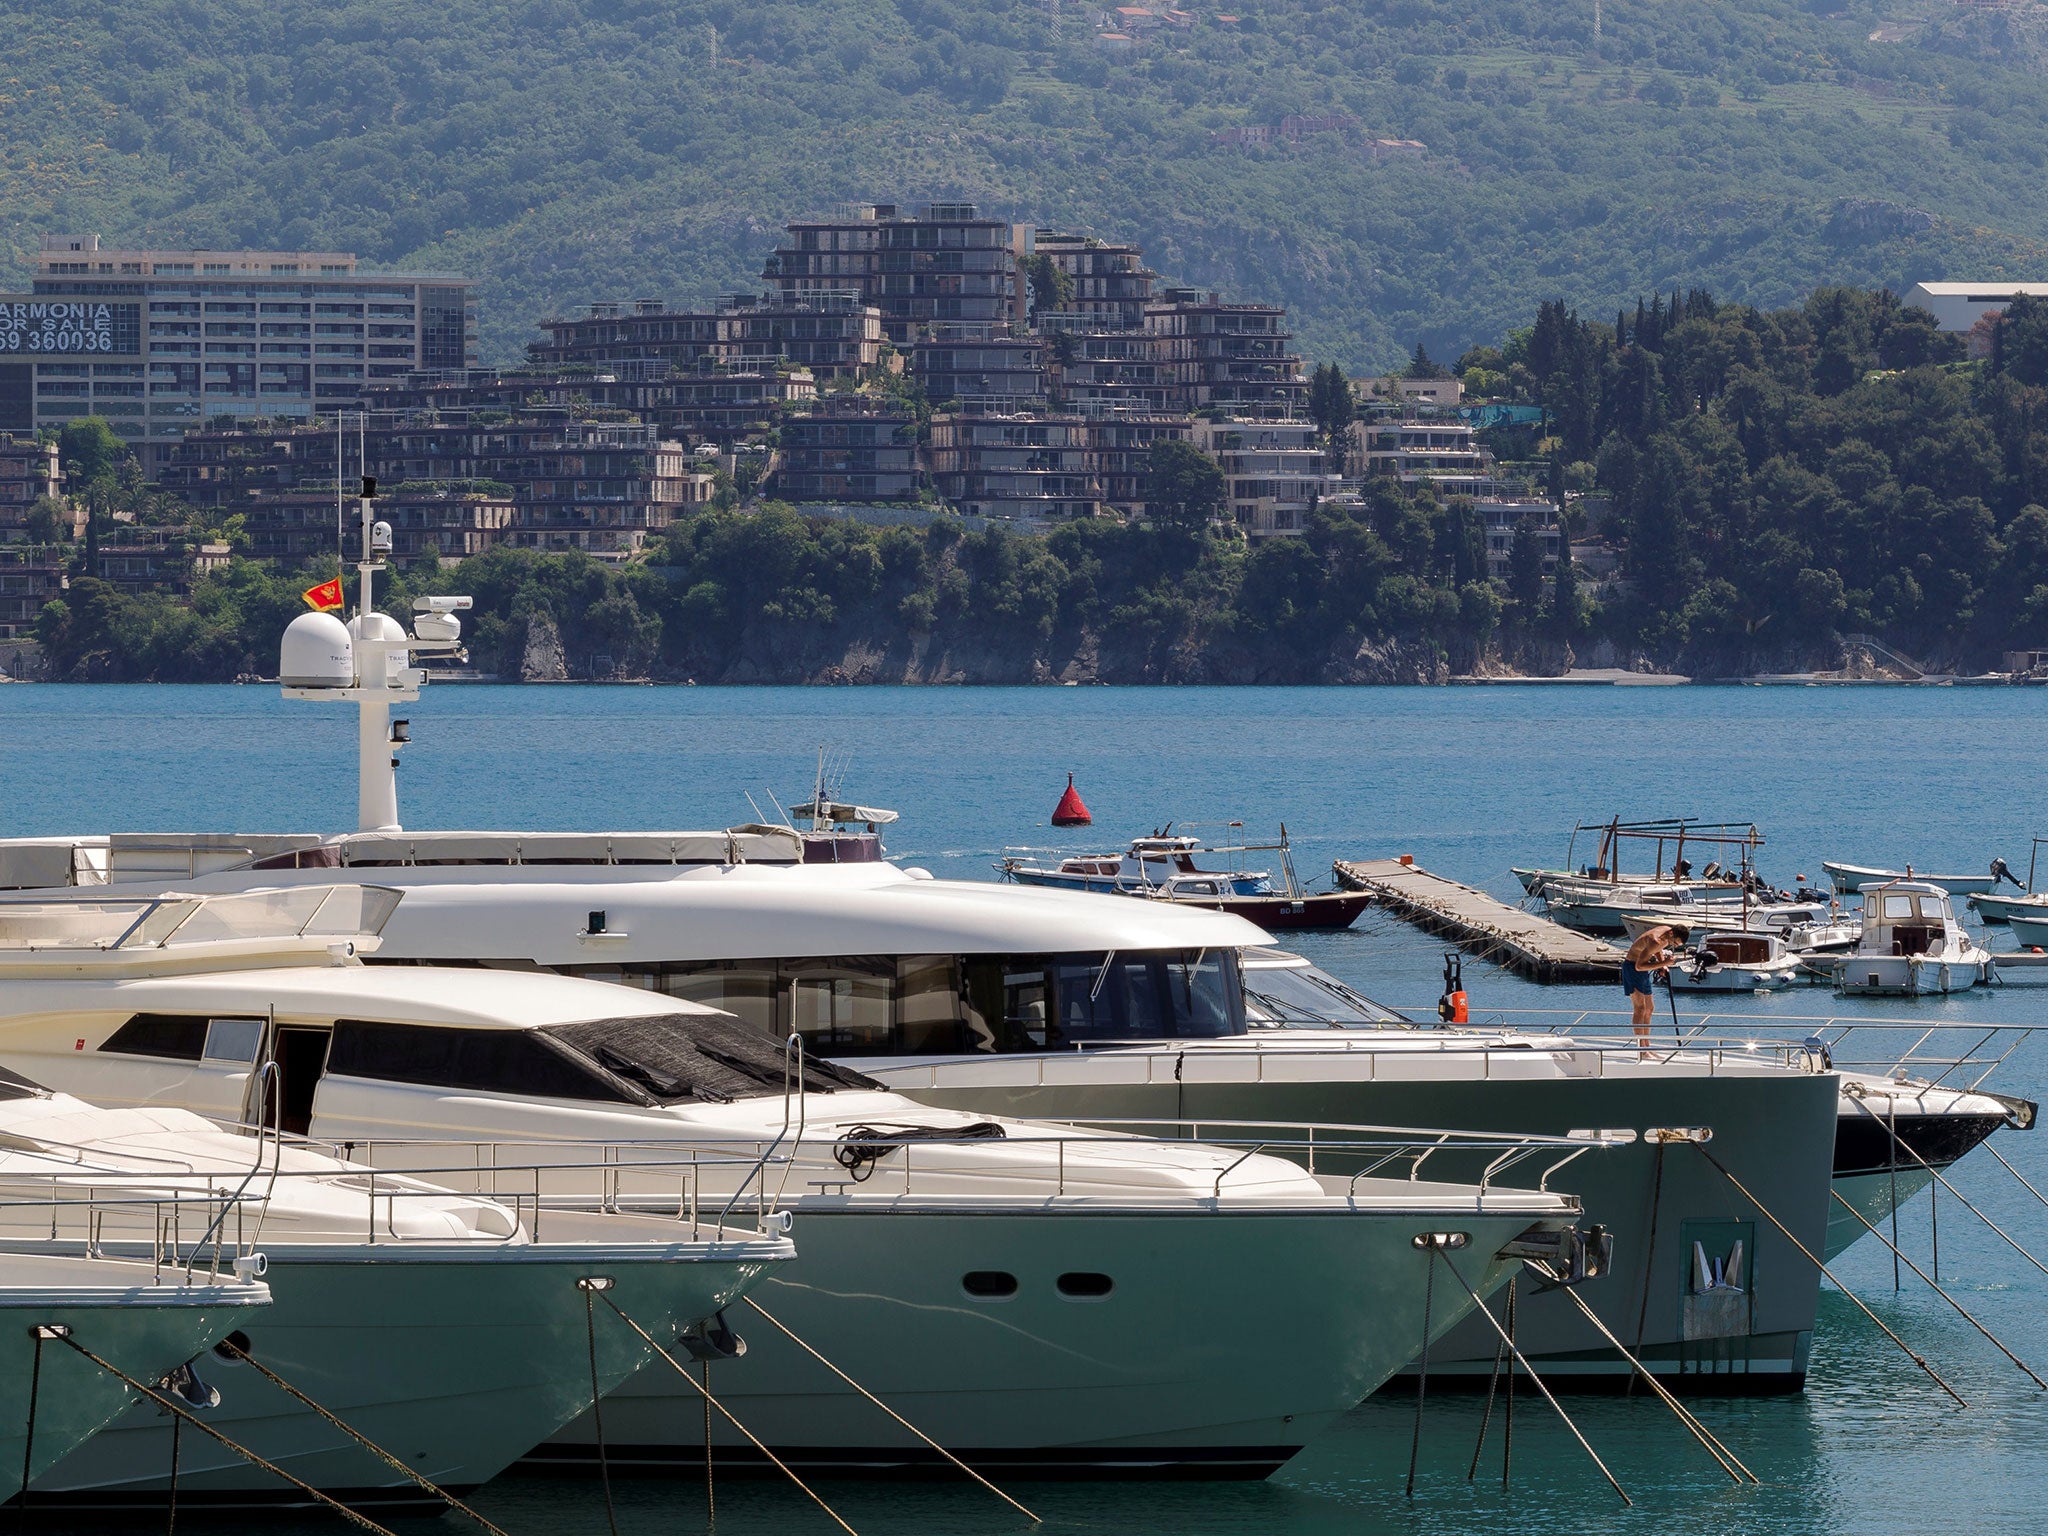 Newly built real estate behind luxury yachts in Budva, Montenegro